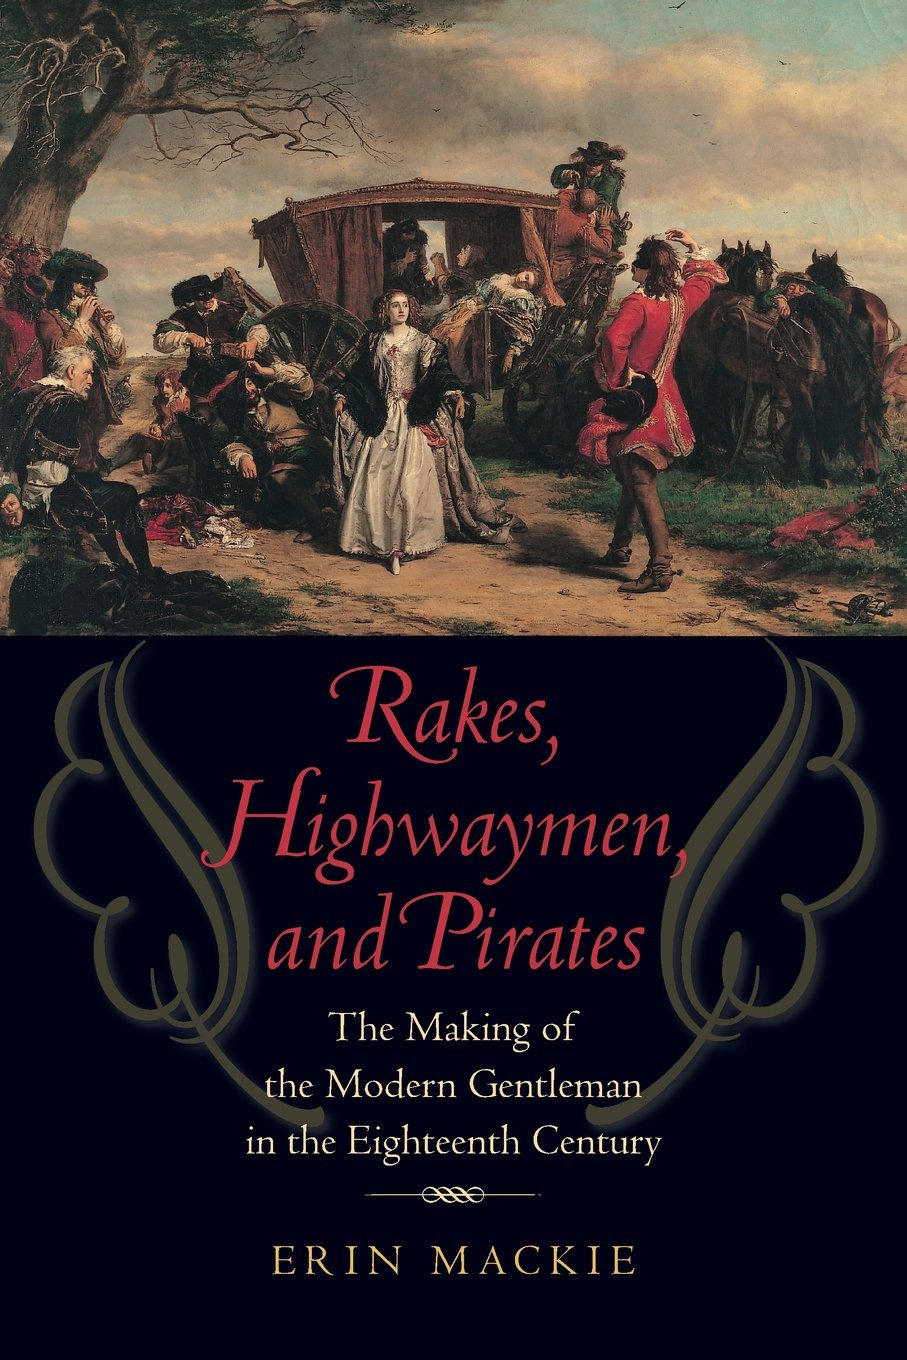 Rakes, Highwaymen, and Pirates: The Making of the Modern Gentleman in the Eighteenth Century